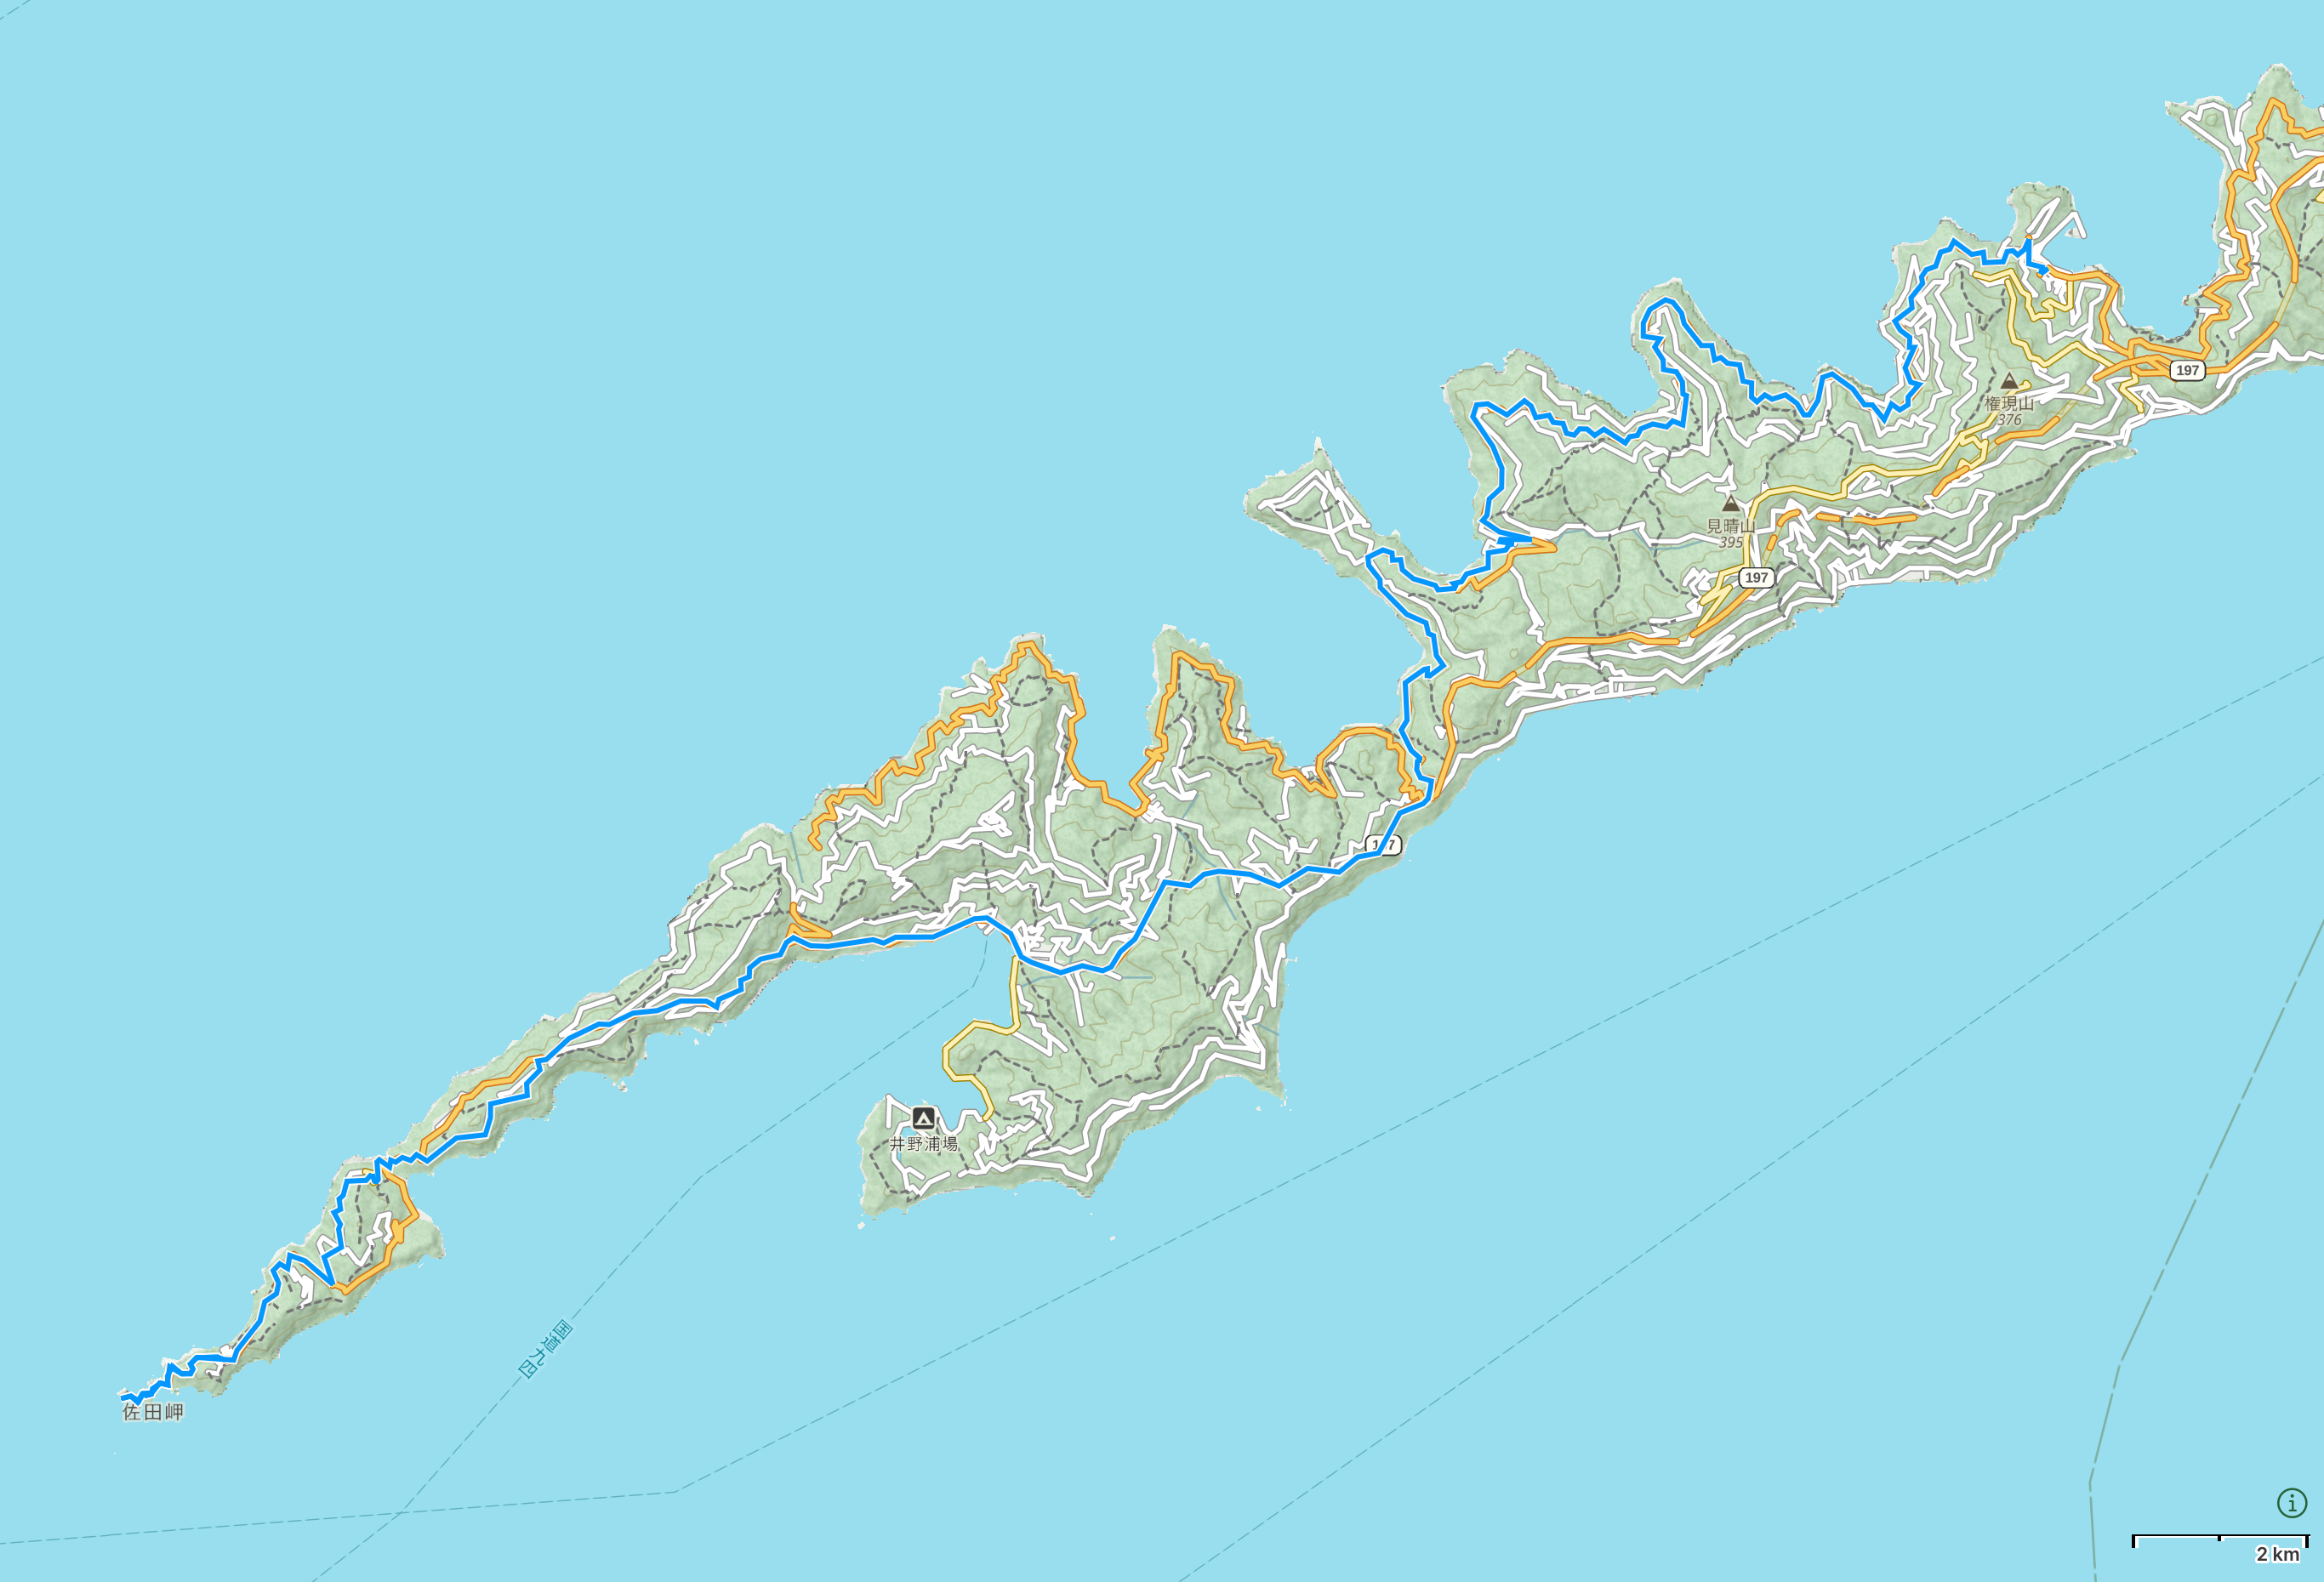 Map of Ehime Prefecture with author’s route between Mitsukue and Cape Sada, the westernmost point of Shikoku, highlighted.